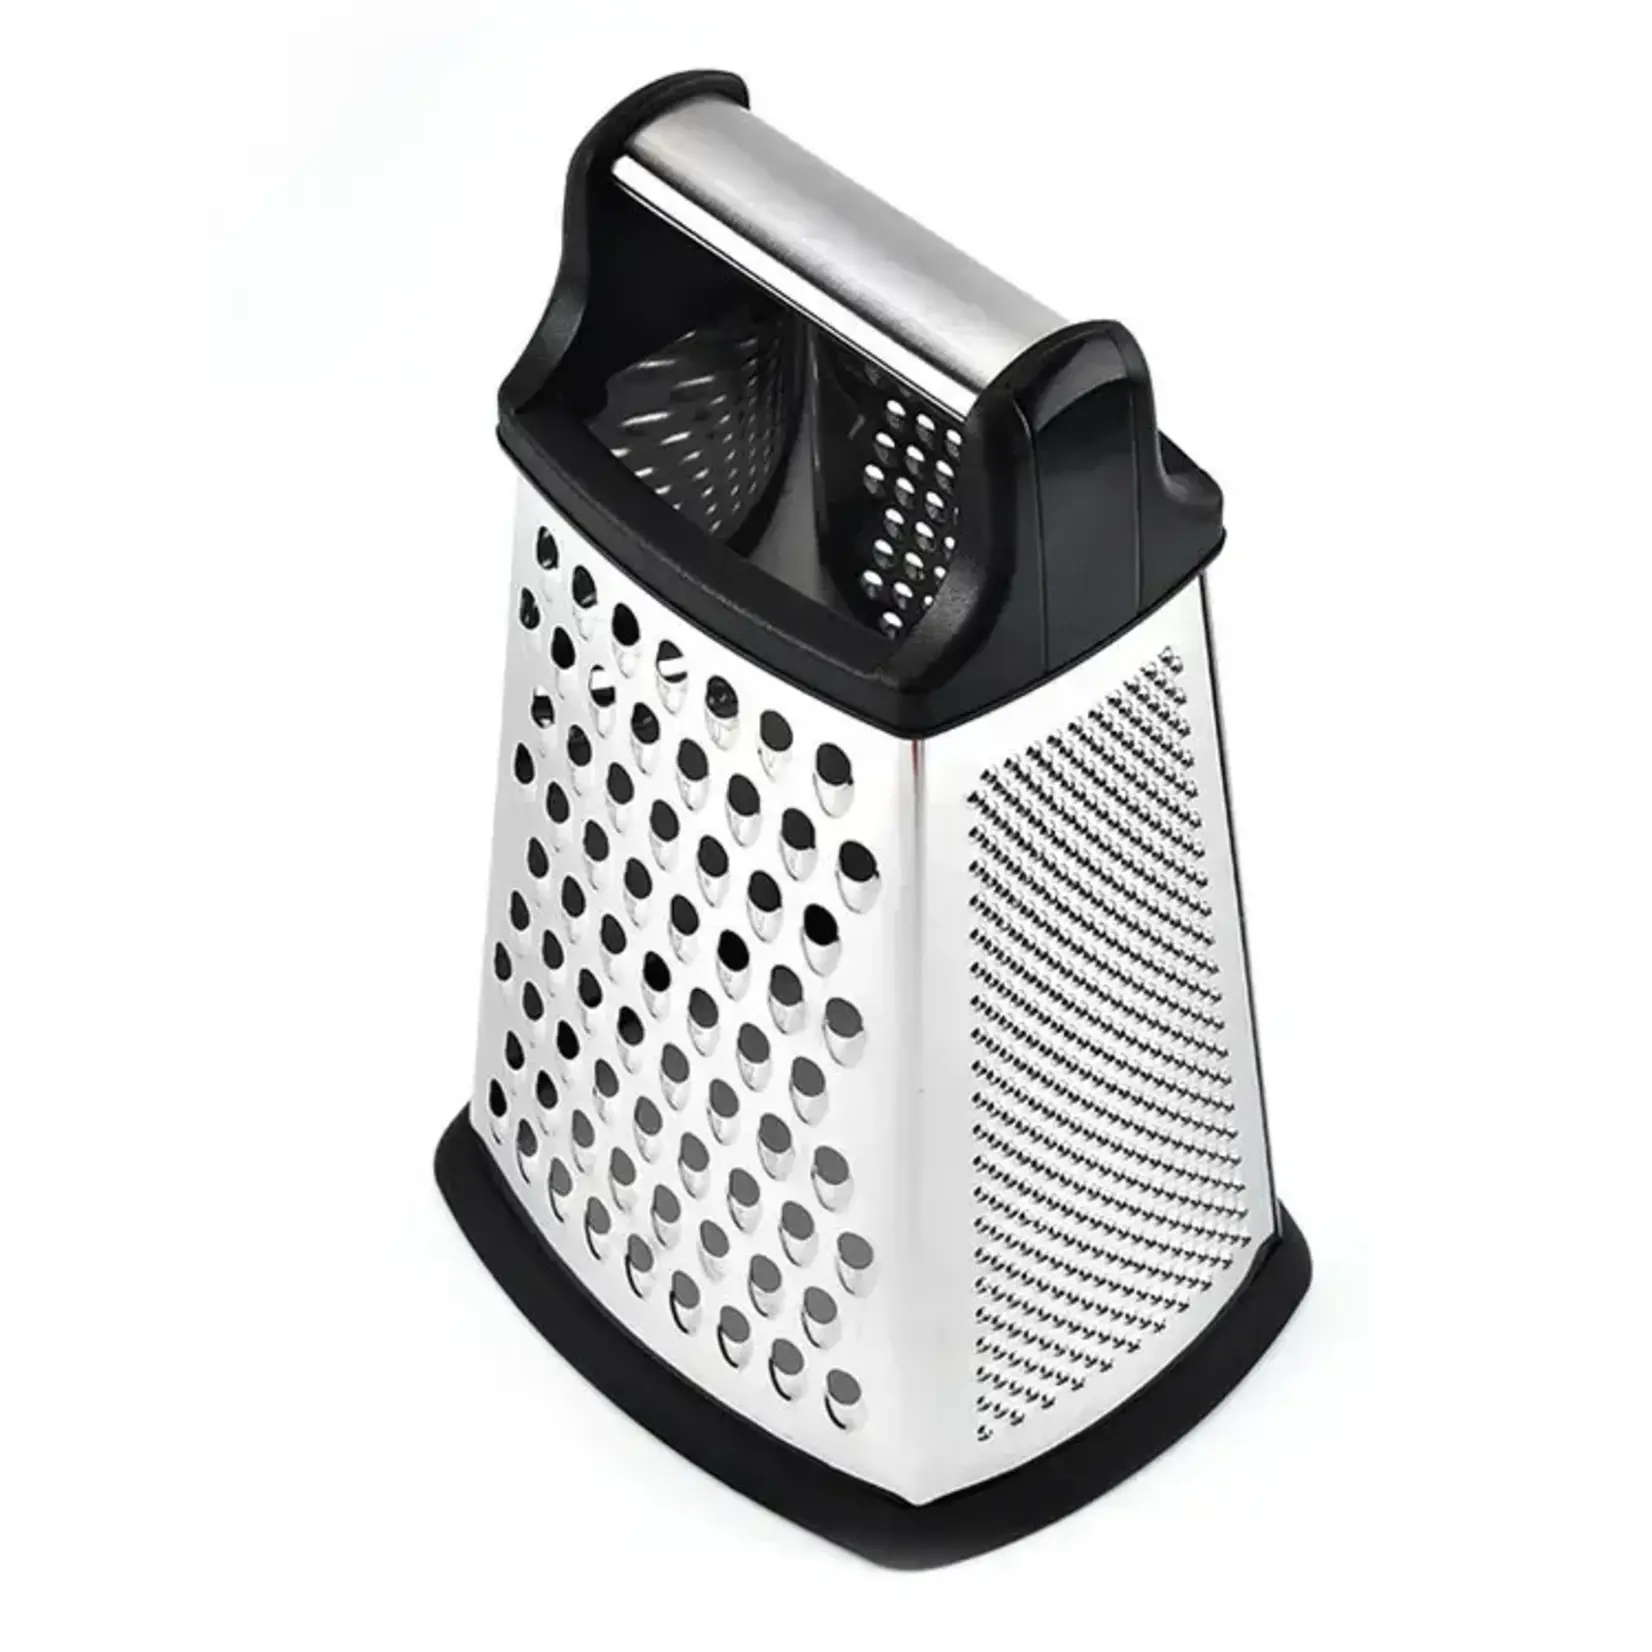 How to Use the Other 3 Sides of Your Box Grater